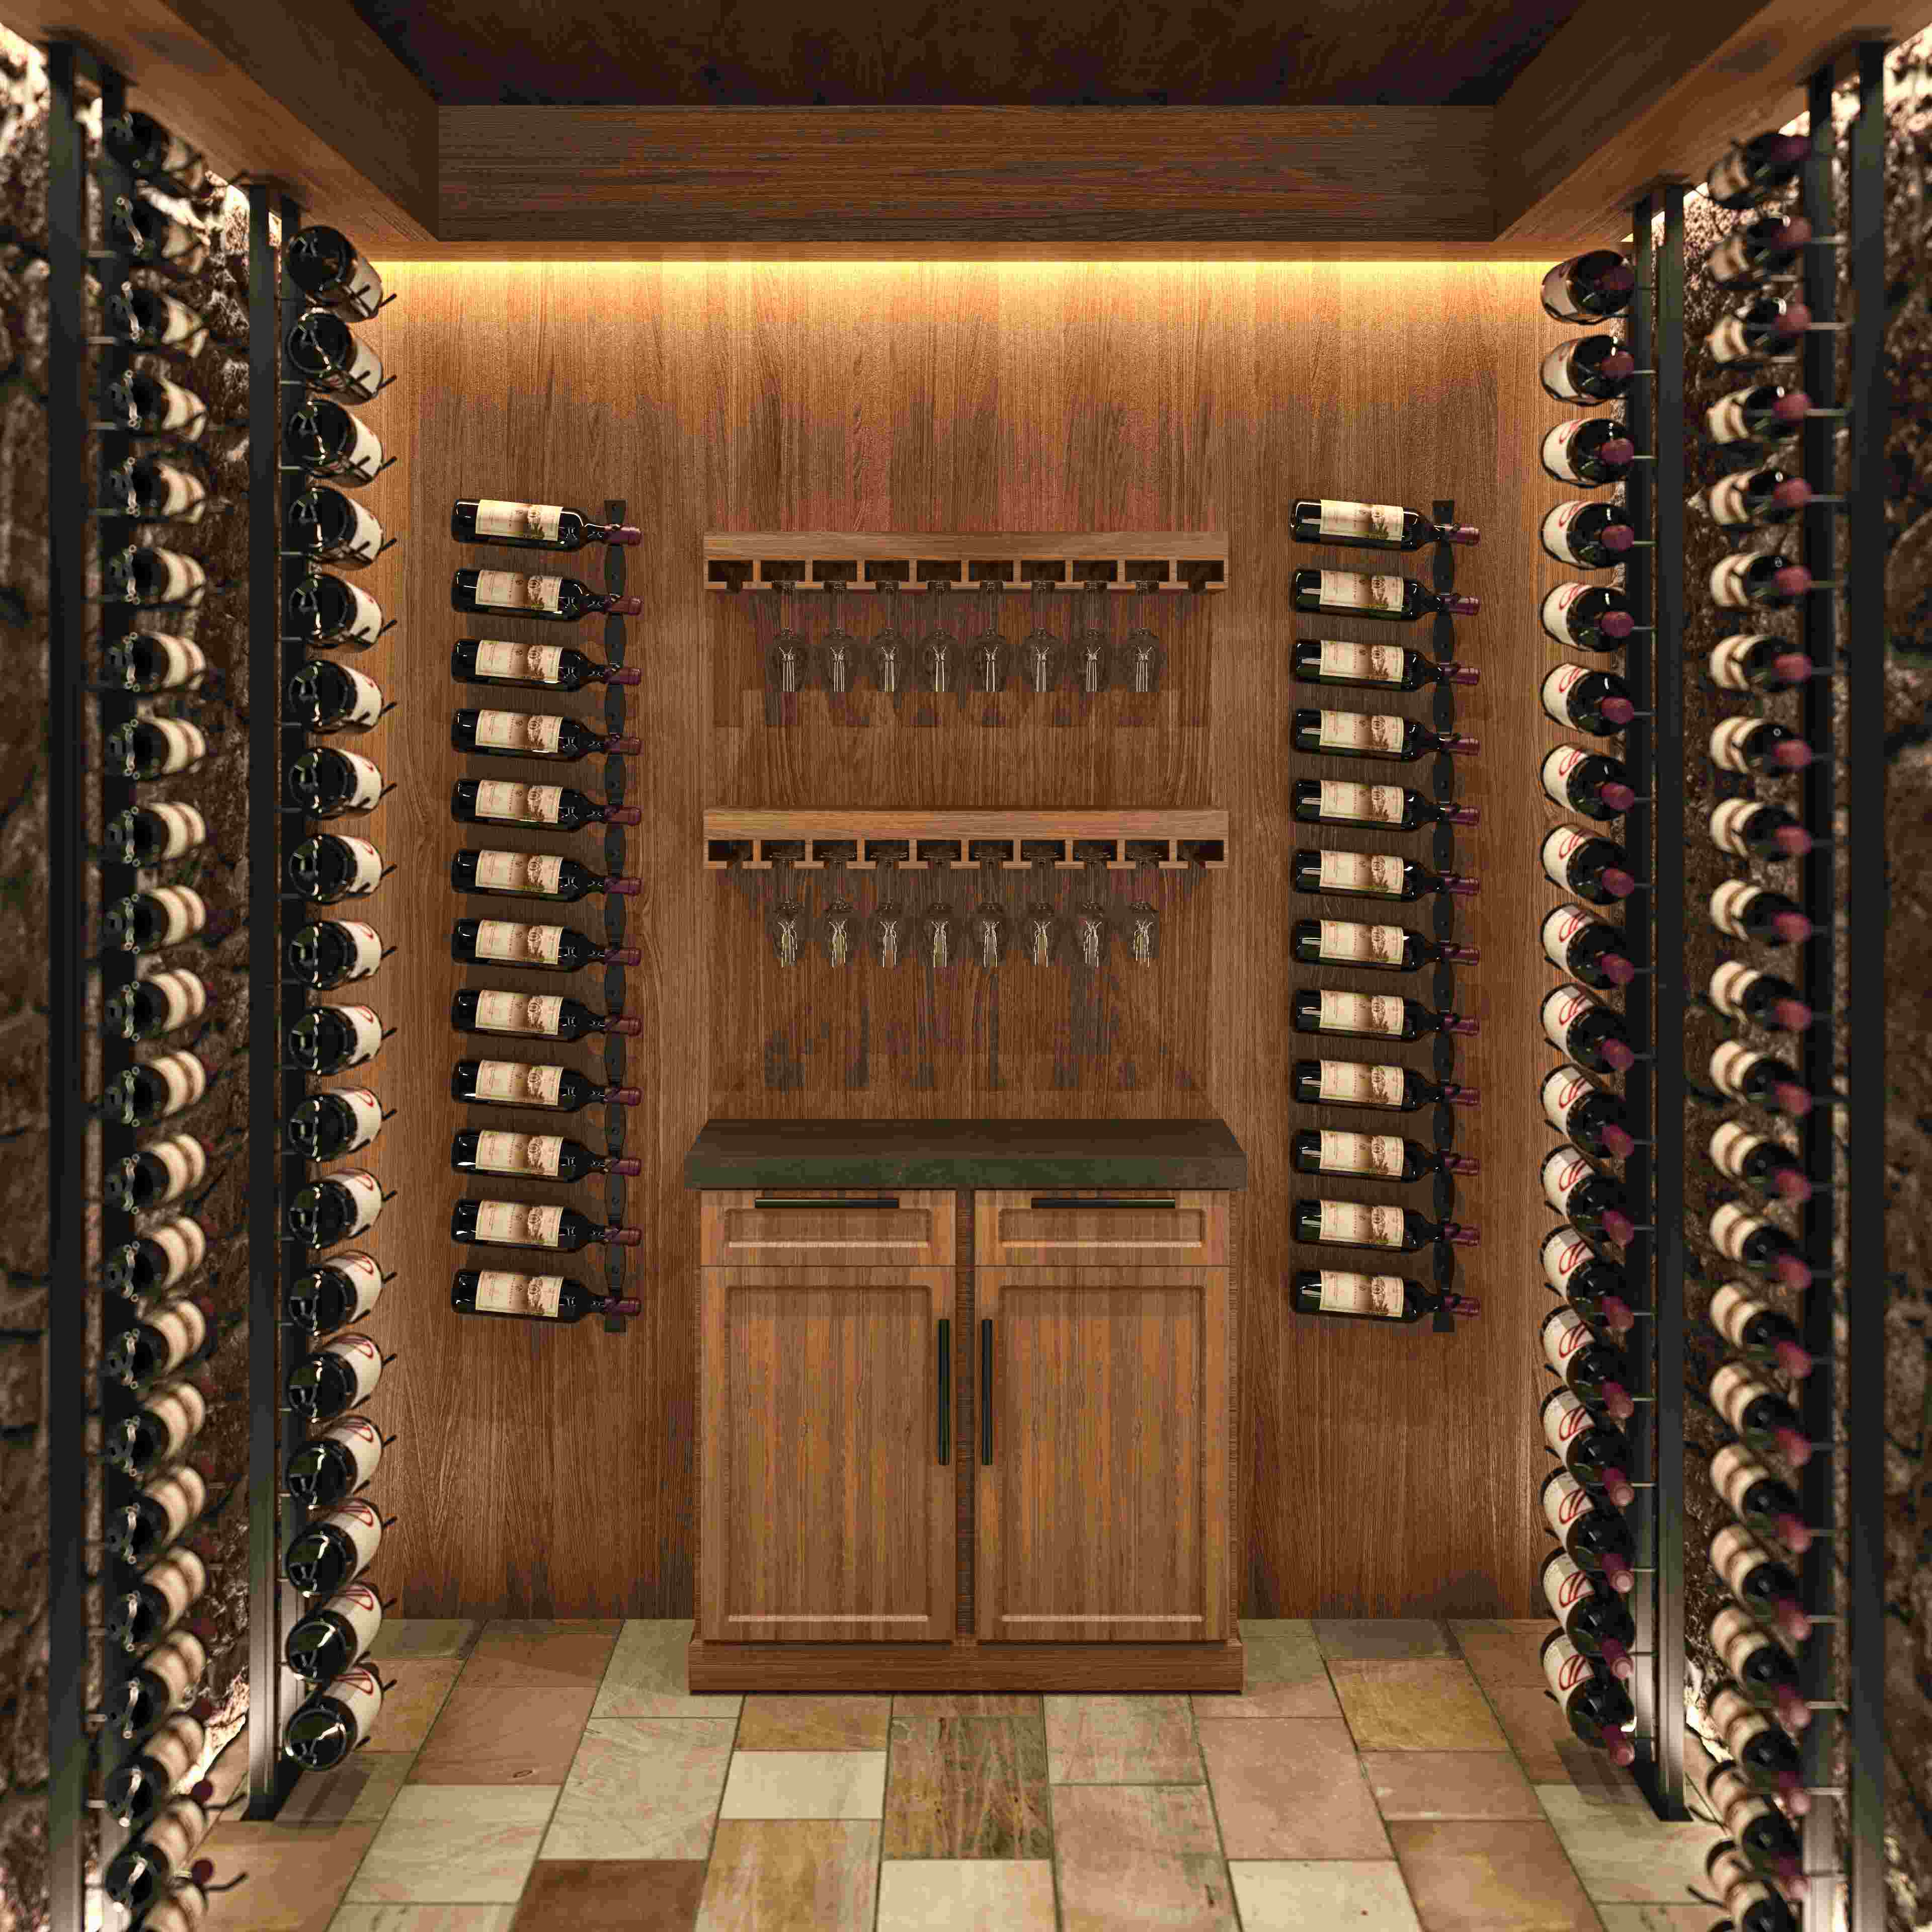 floor to ceiling wine rack frame with helix wine racks on back wall of wine cellar